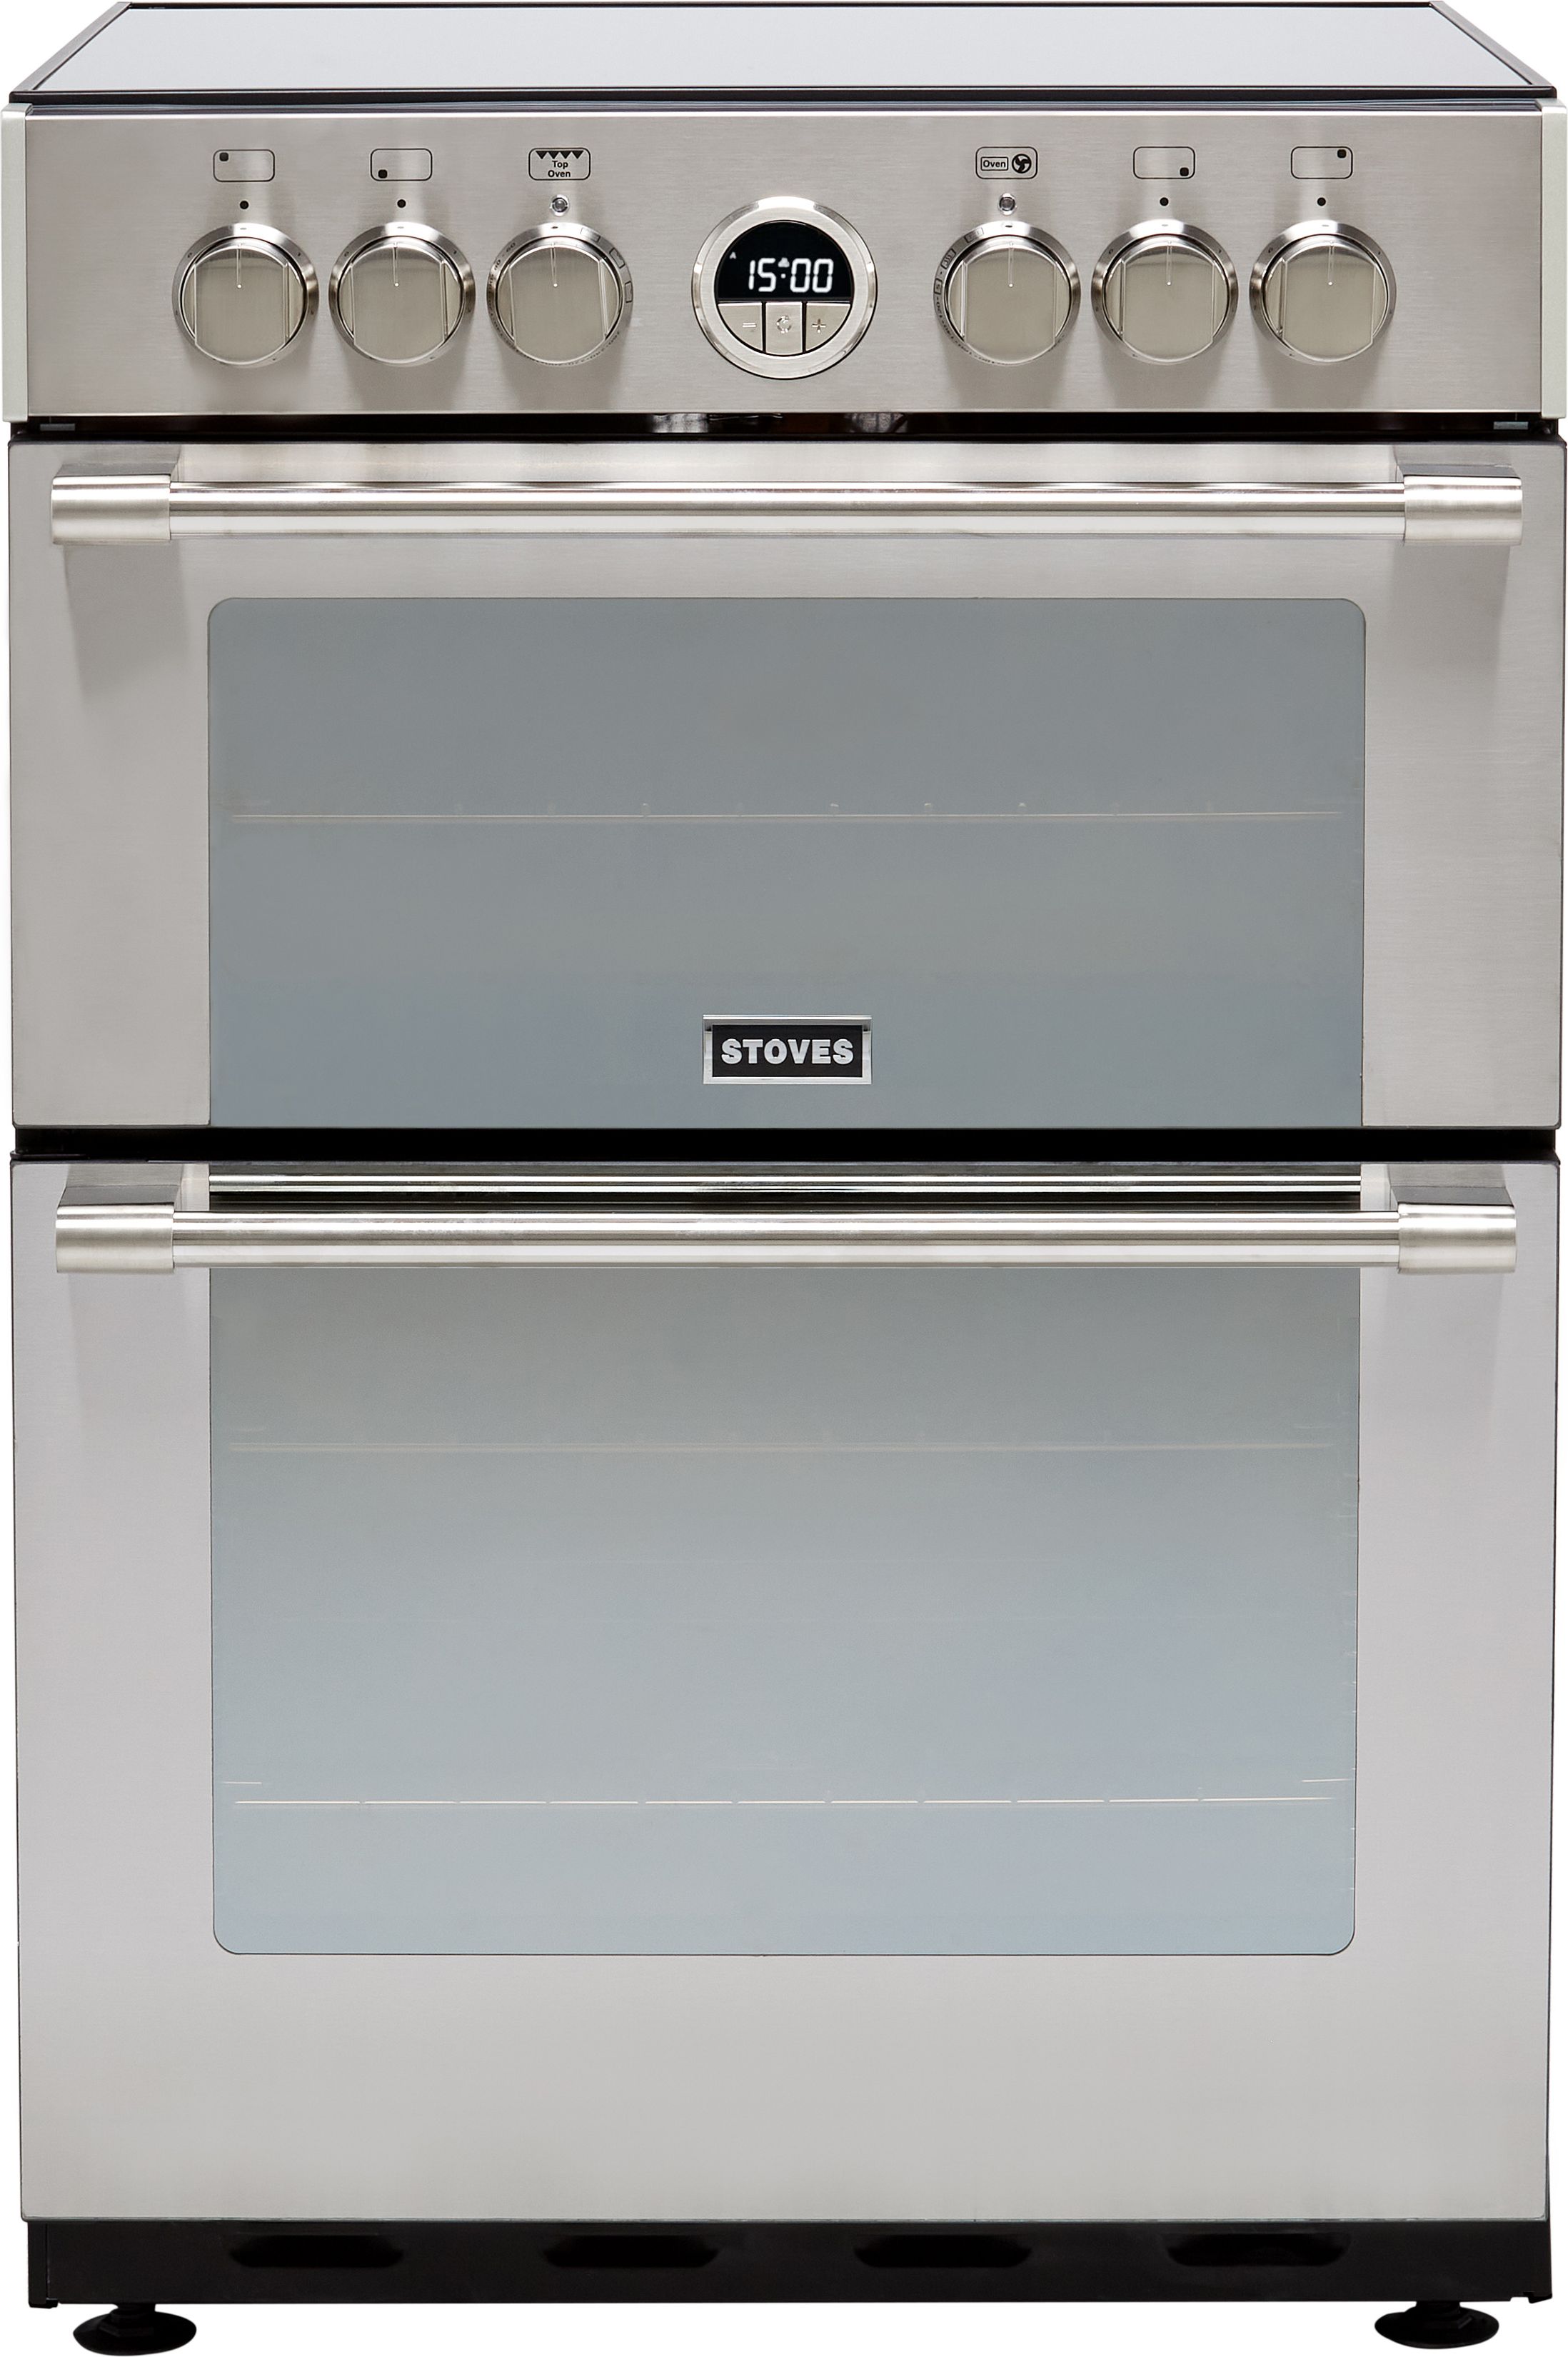 Stoves STERLING600E 60cm Electric Cooker with Ceramic Hob - Stainless Steel - A/A Rated, Stainless Steel